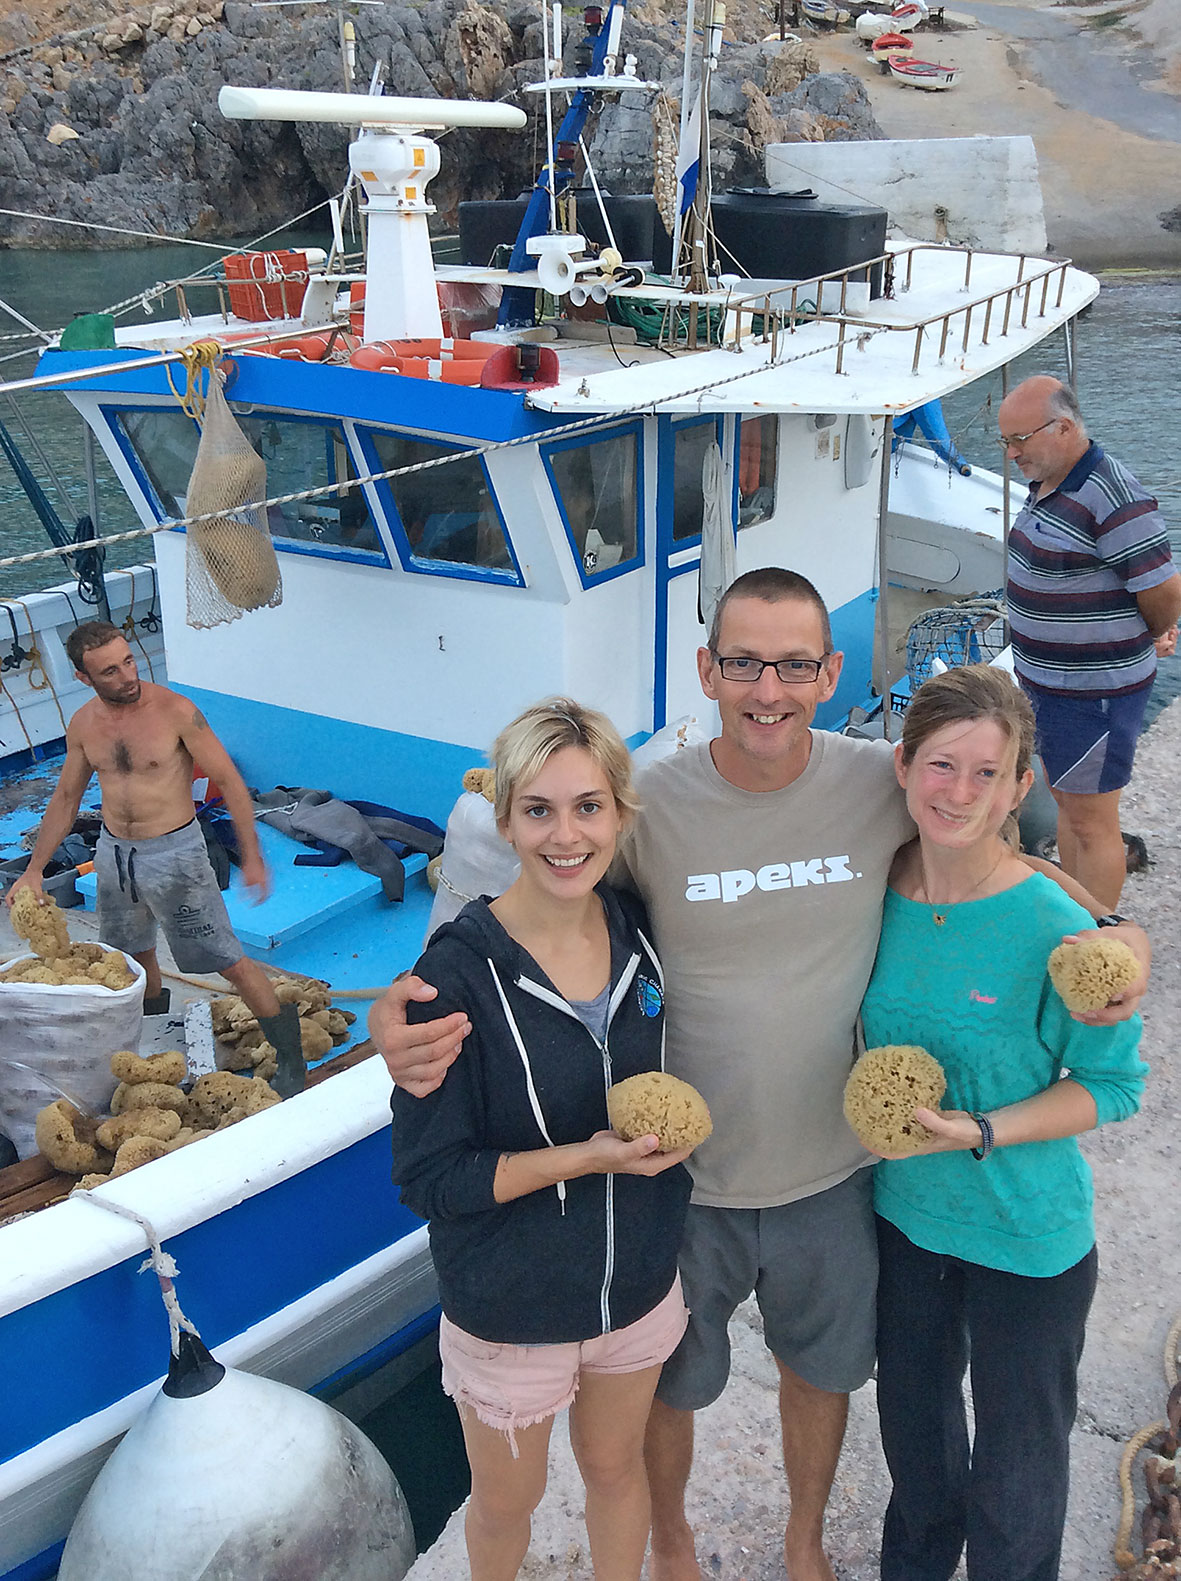 Gemma Smith, Phil Short & Jo Marchant had a great time talking to the sponge divers.